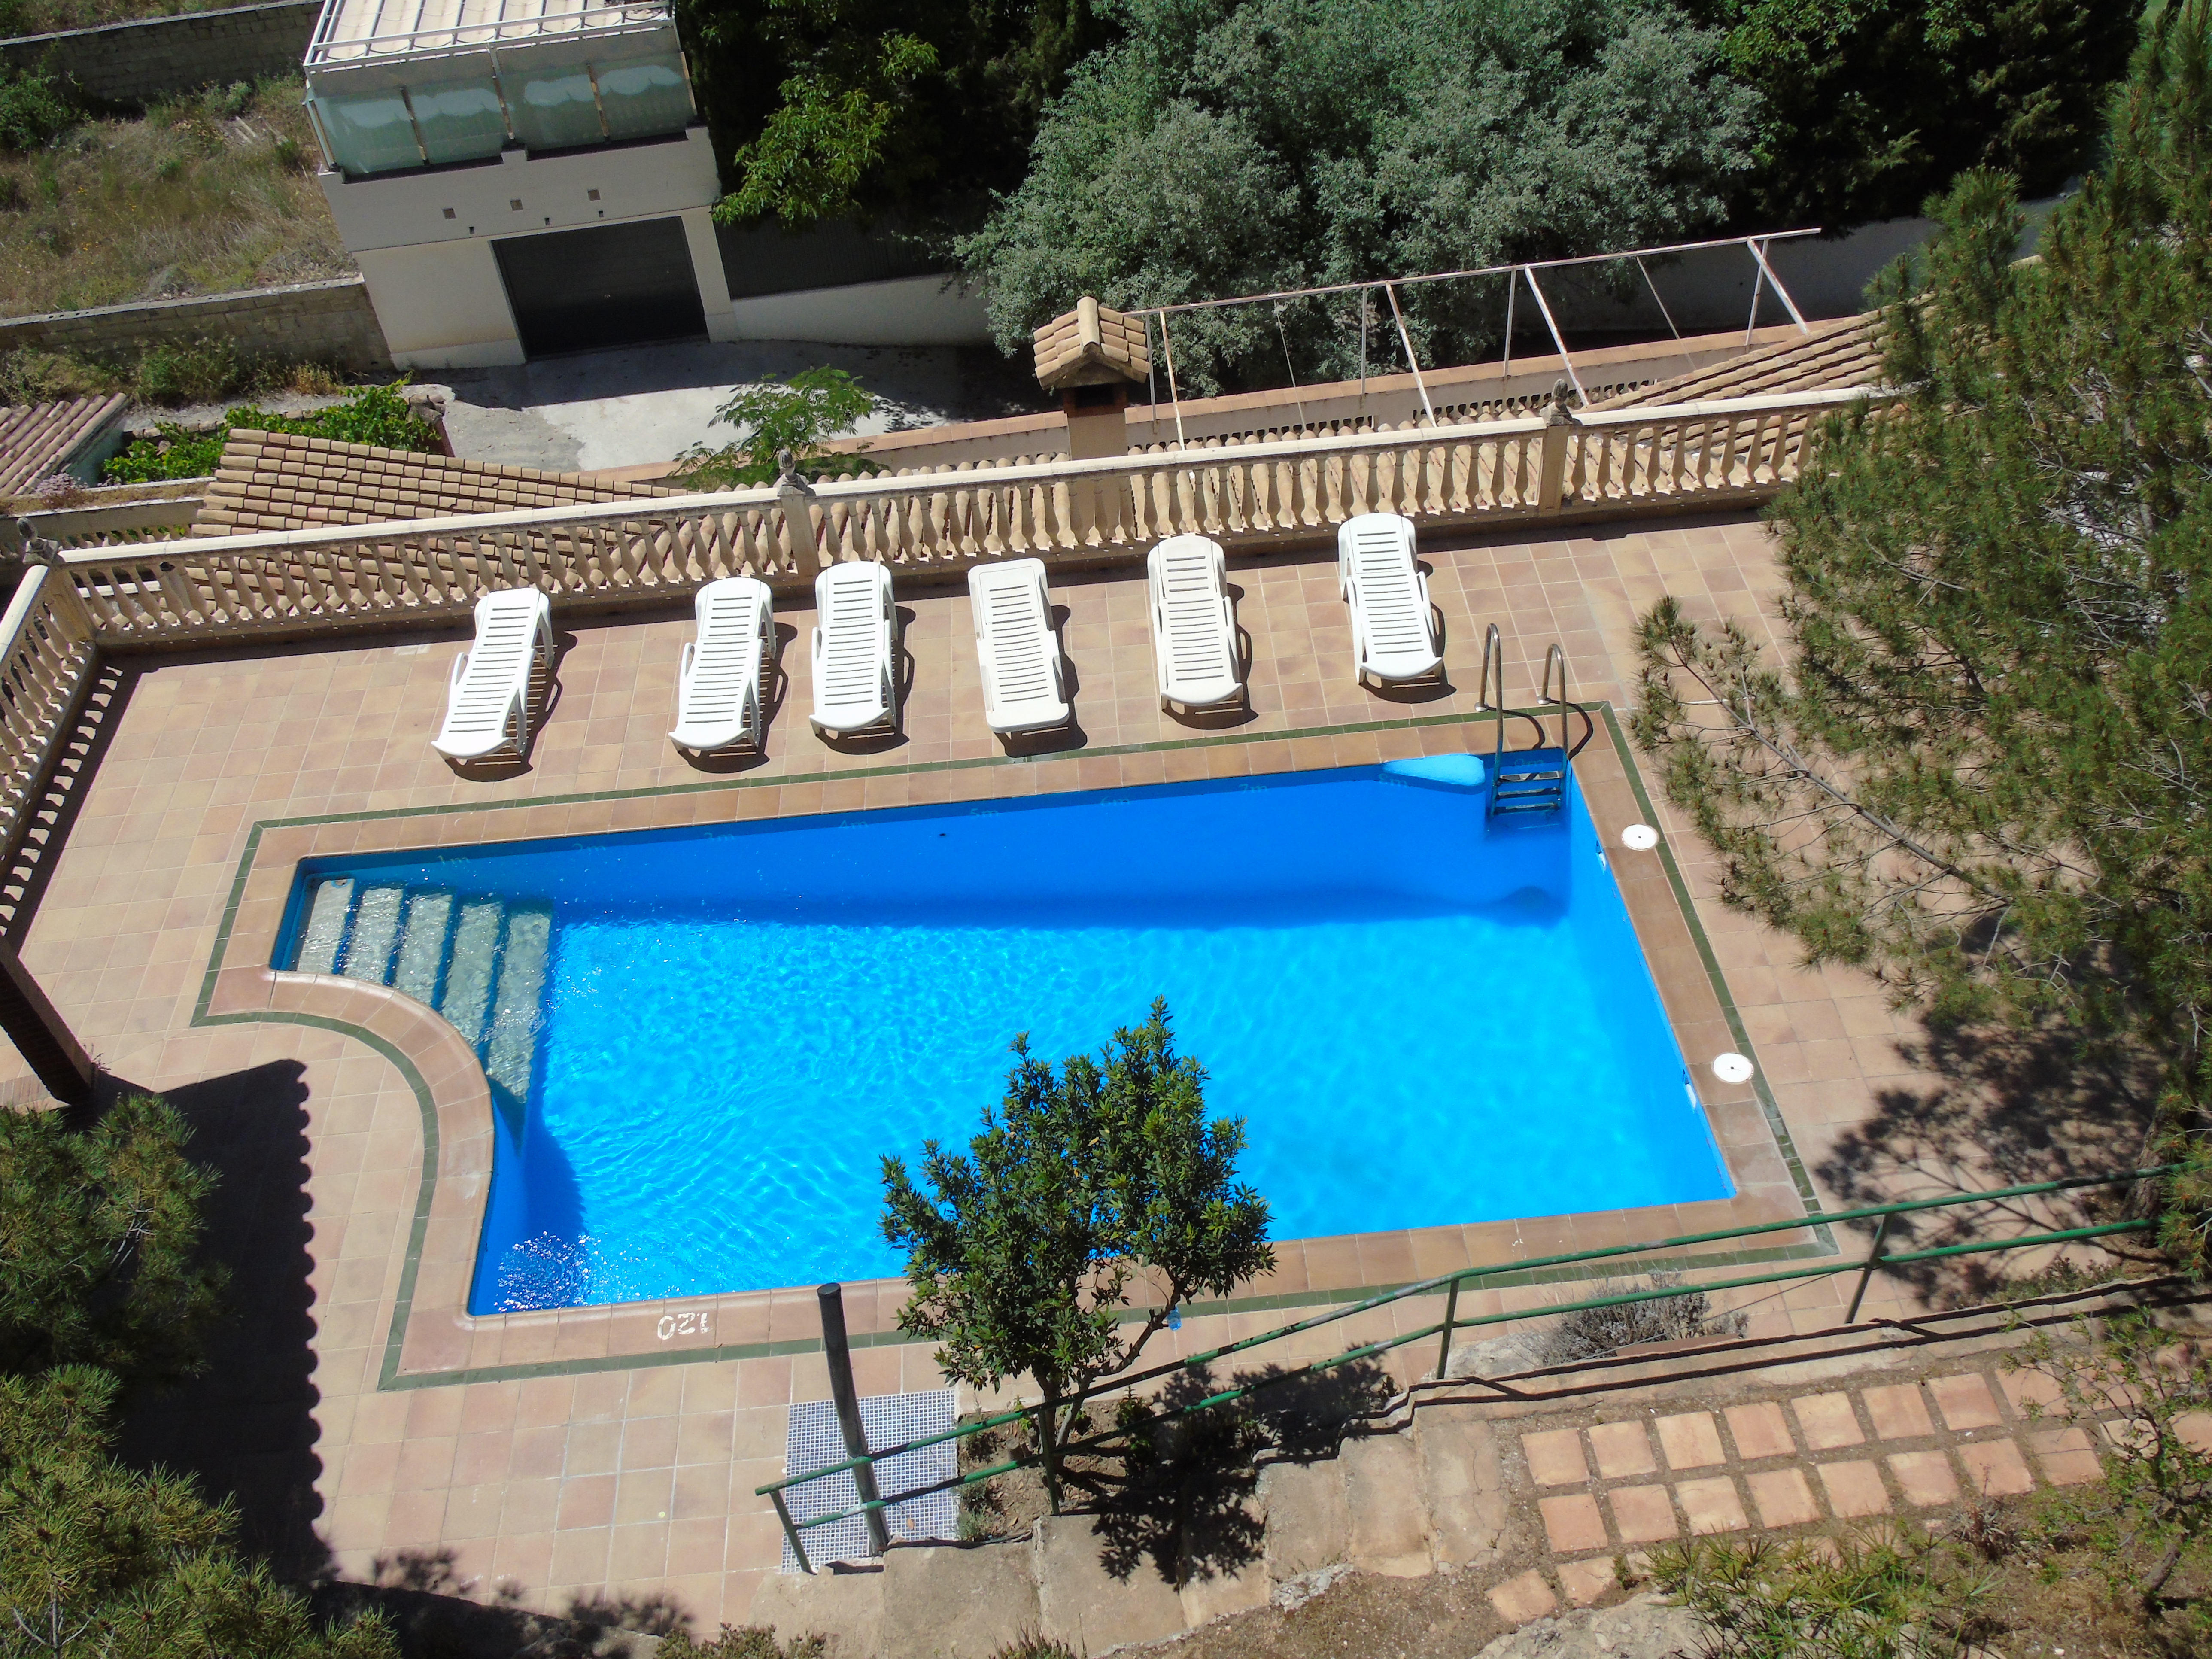 View of the pool area from the appartments.